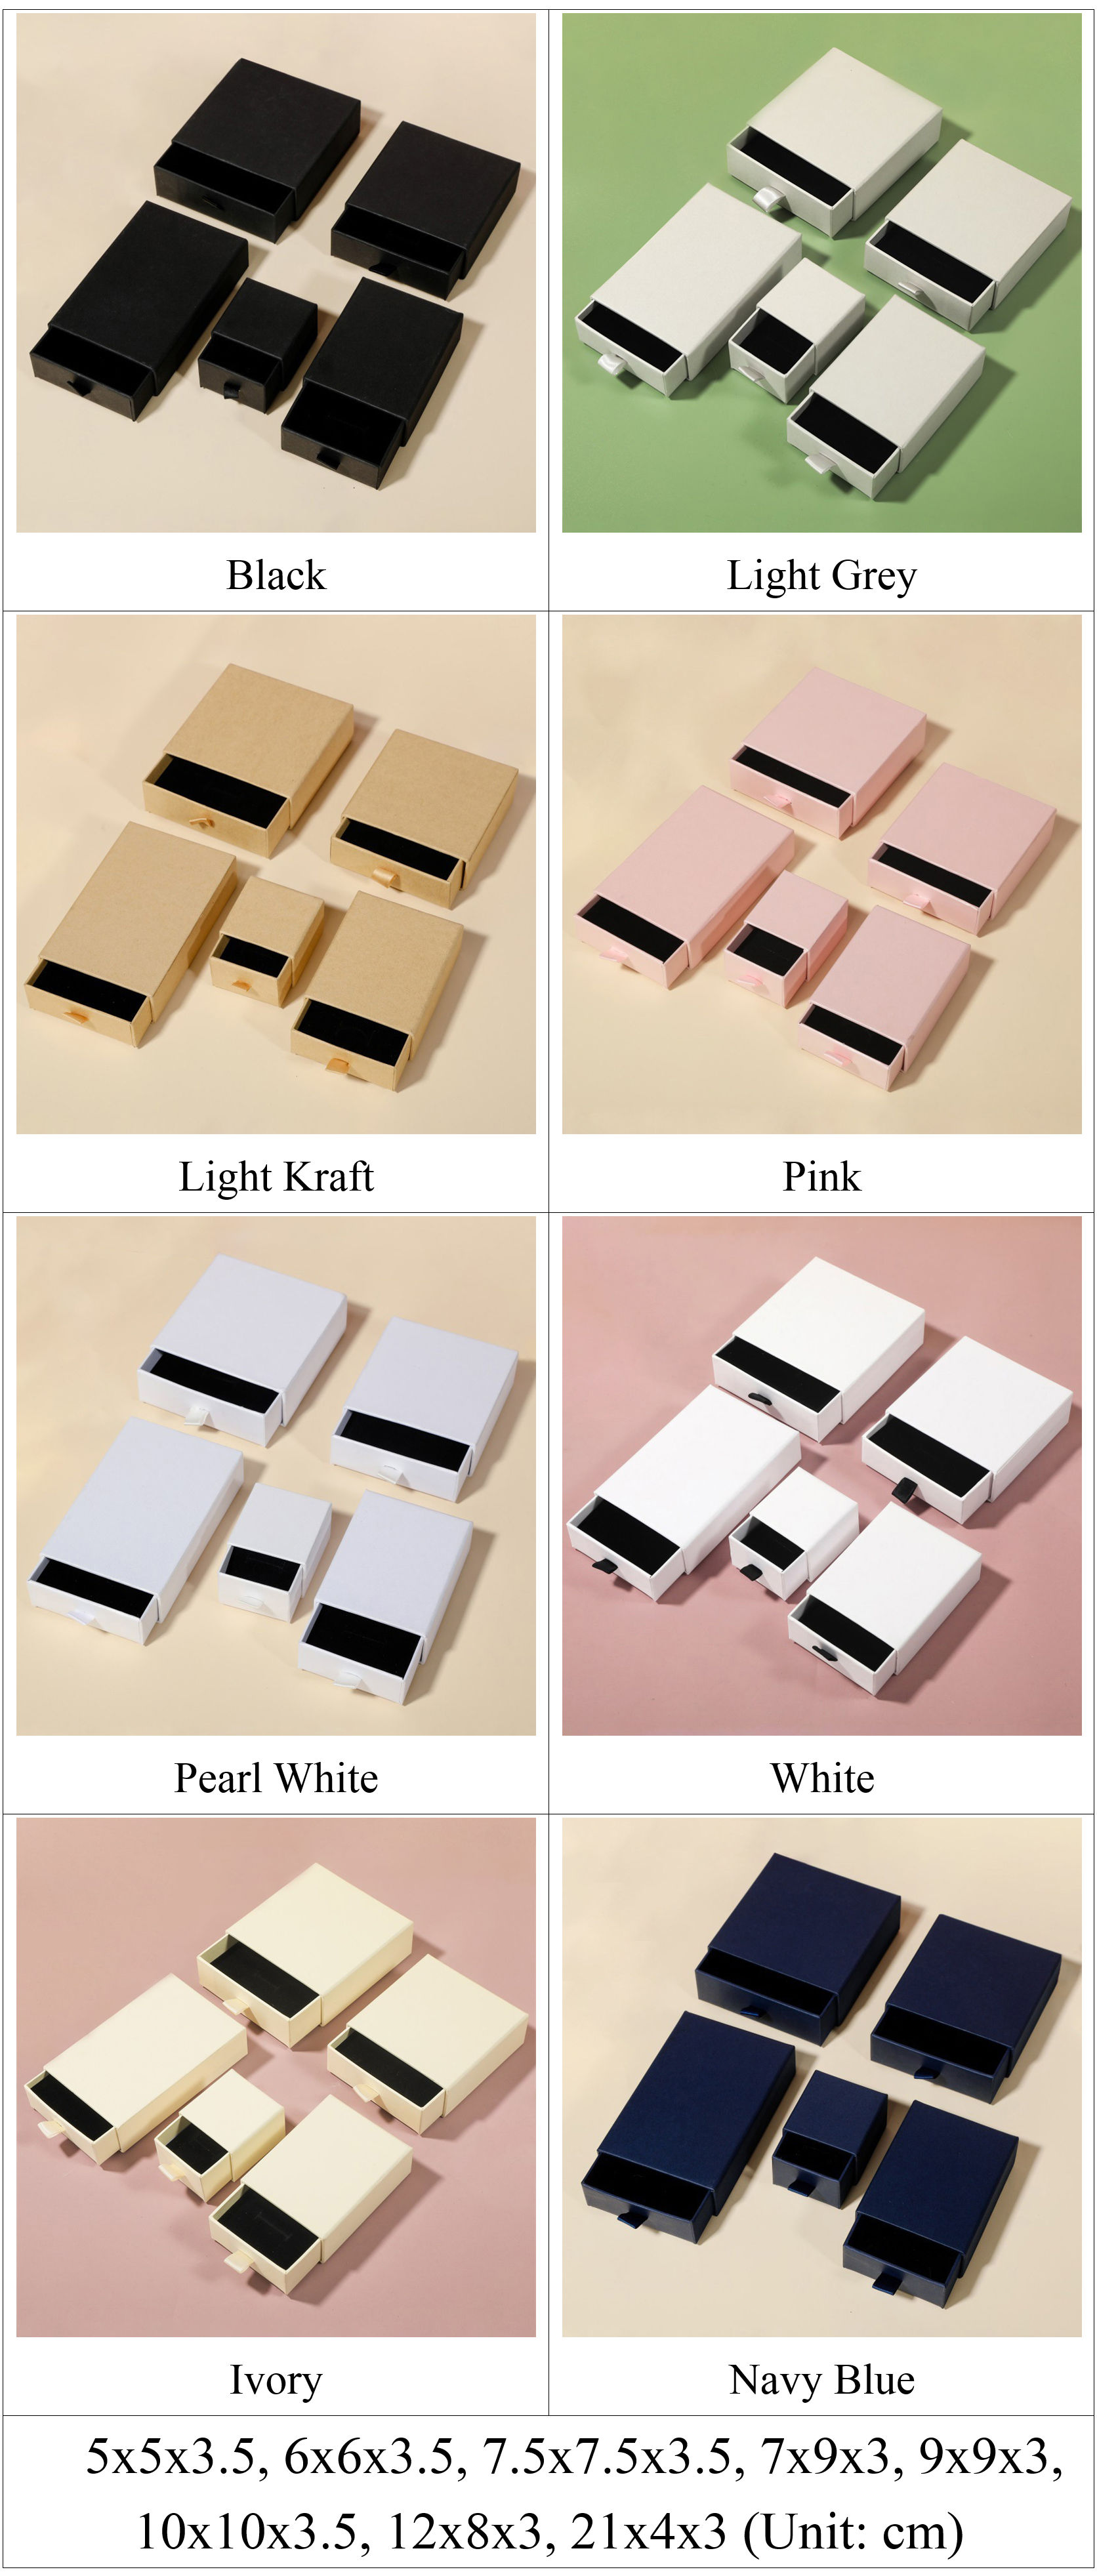 Wholesale Paper Drawer Box for Jewelry, Stocked Colors and Sizes.